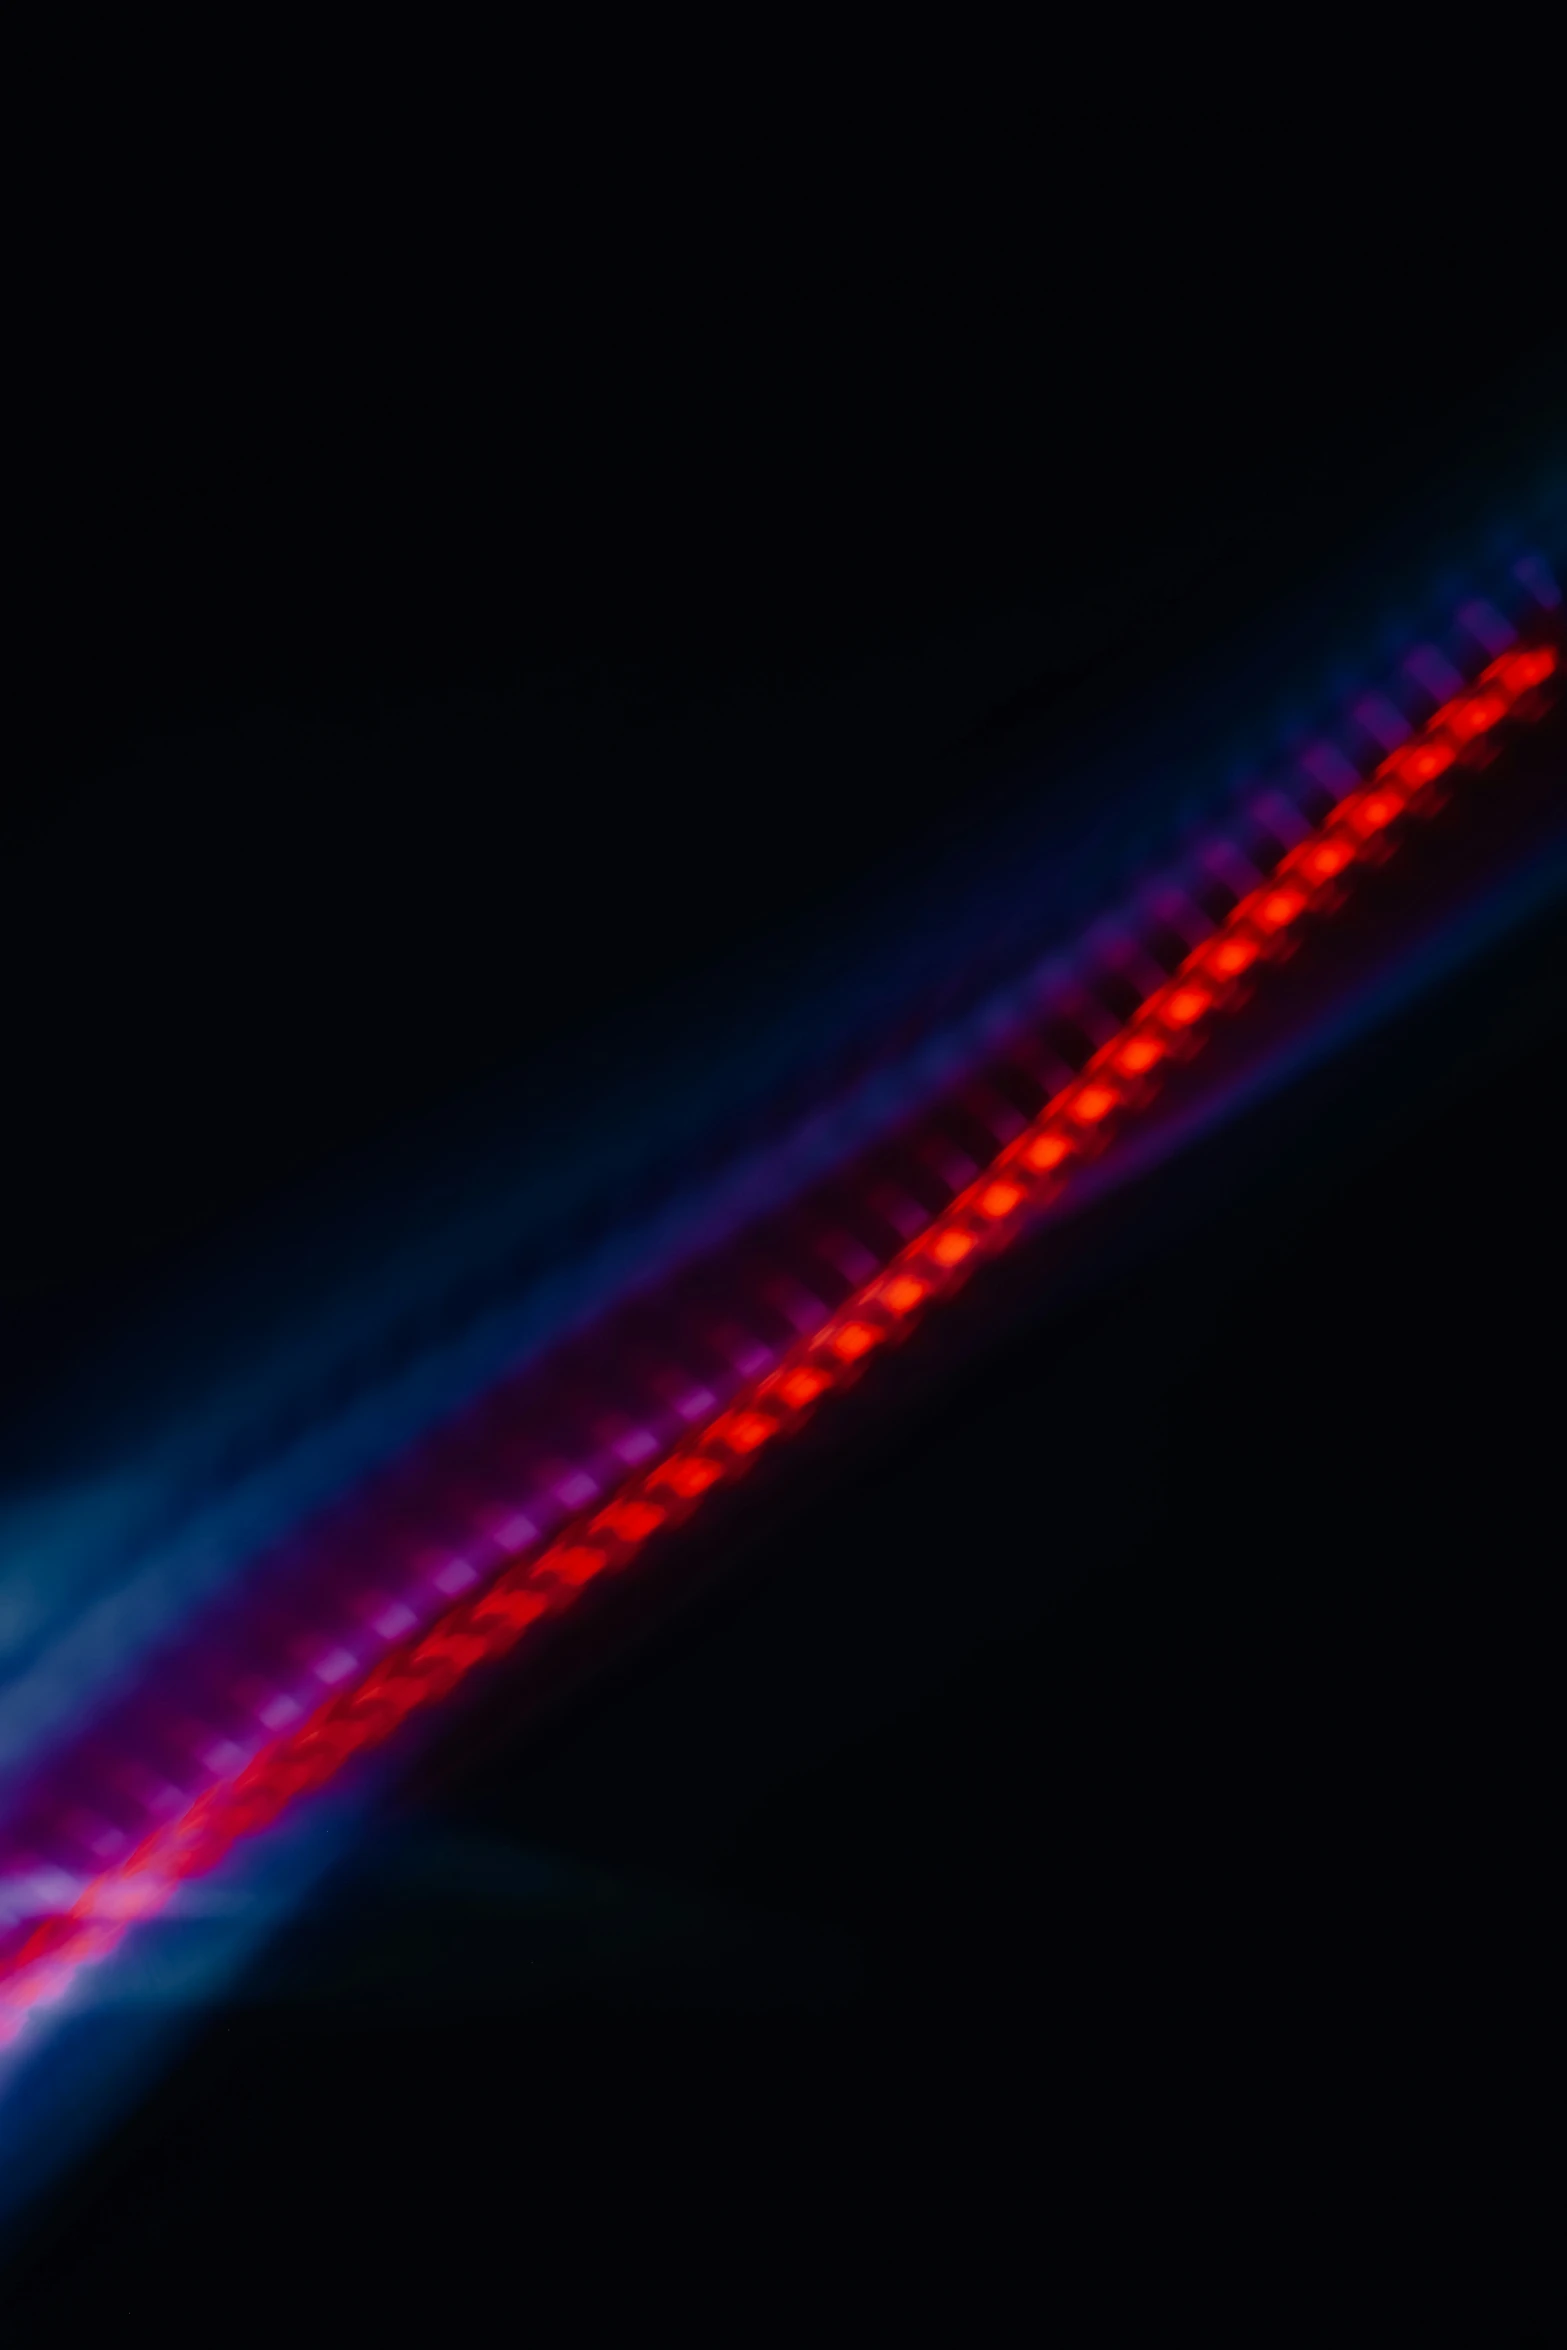 the image shows a long red, white and blue streak that appears to be distorted on a surface